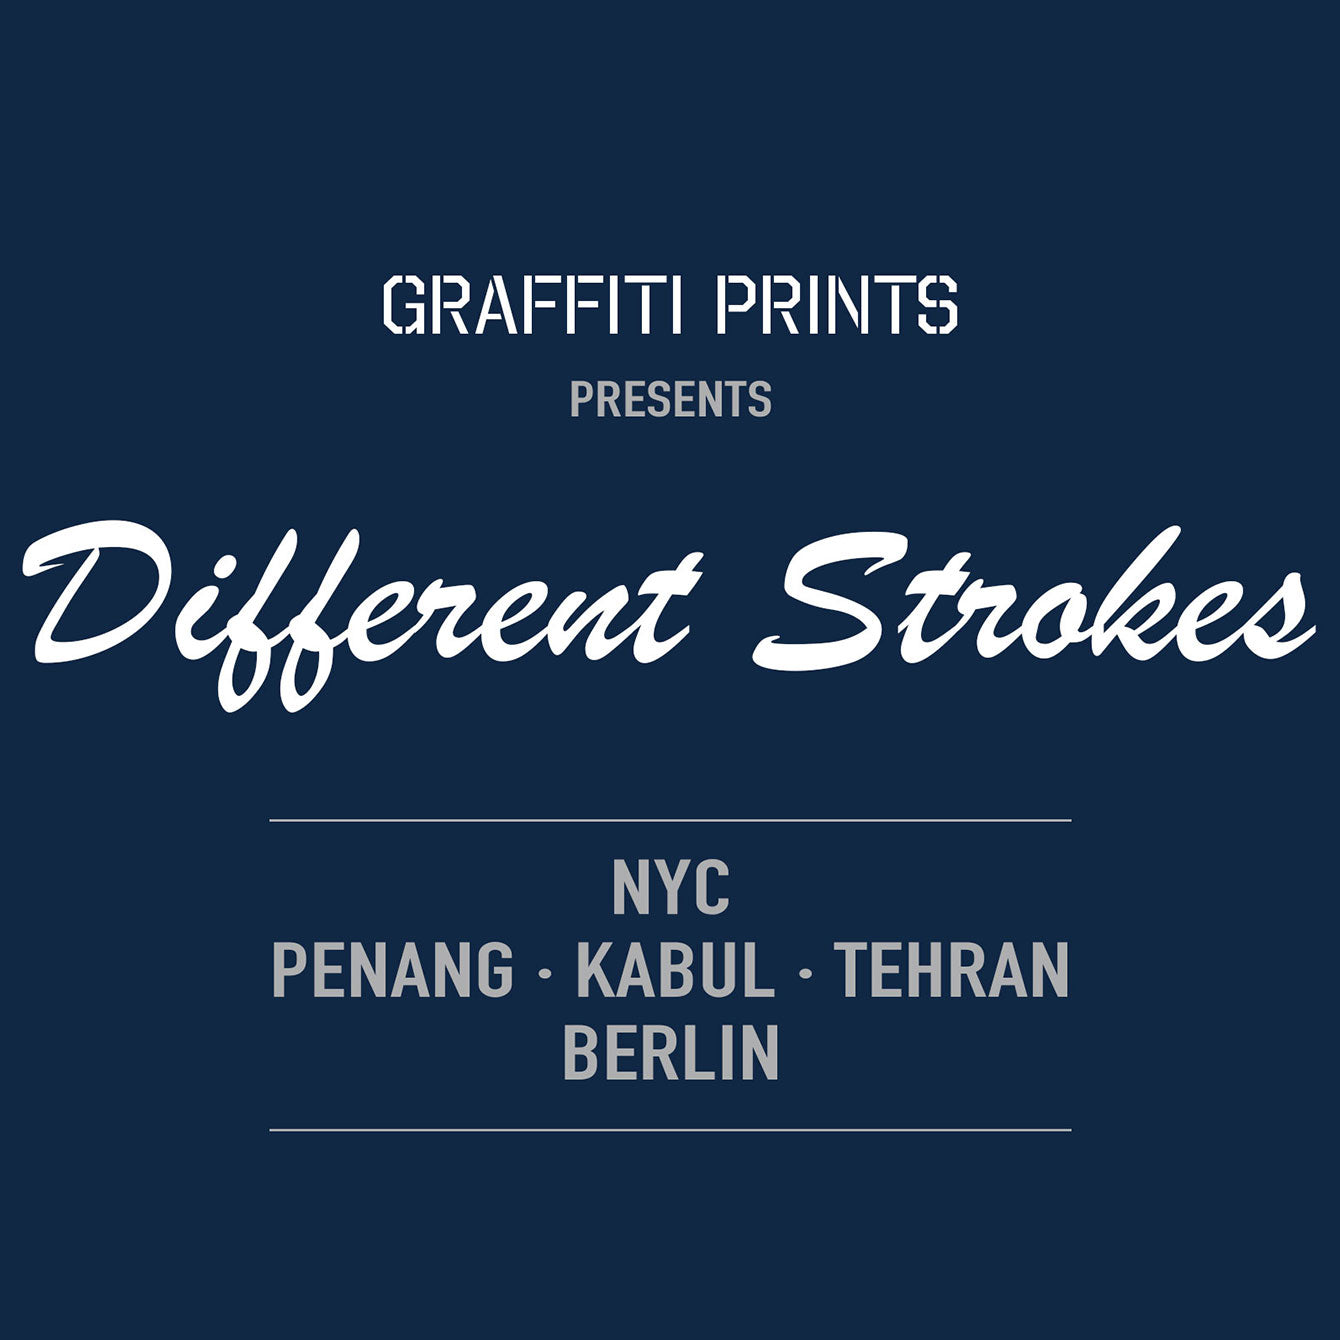 ON TOUR, "Different Strokes"